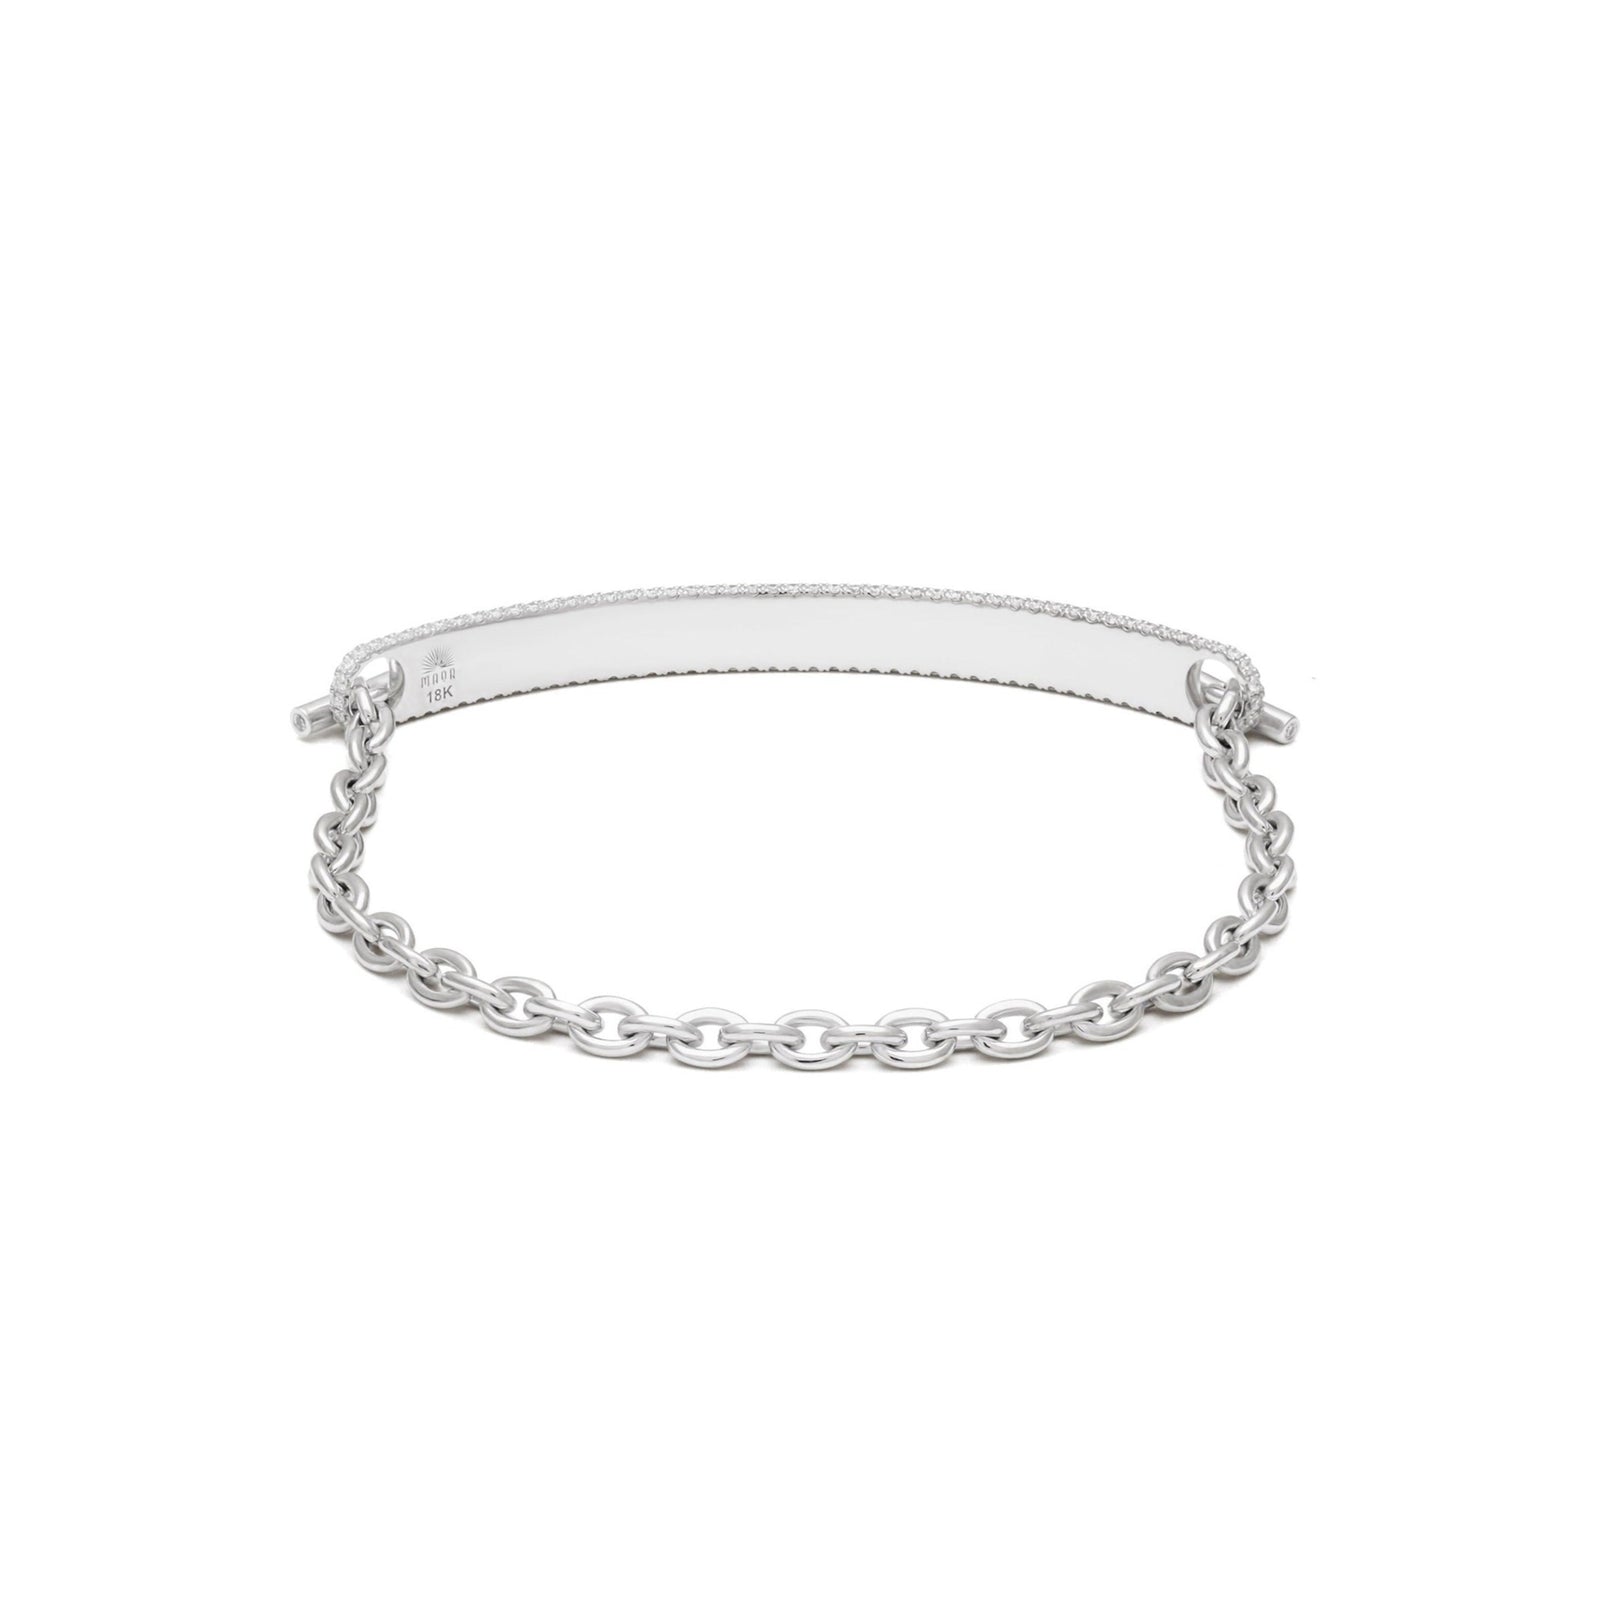 ID Bar Bracelet | 50mm Wide - 5mm Height | Pave Detail | White Gold